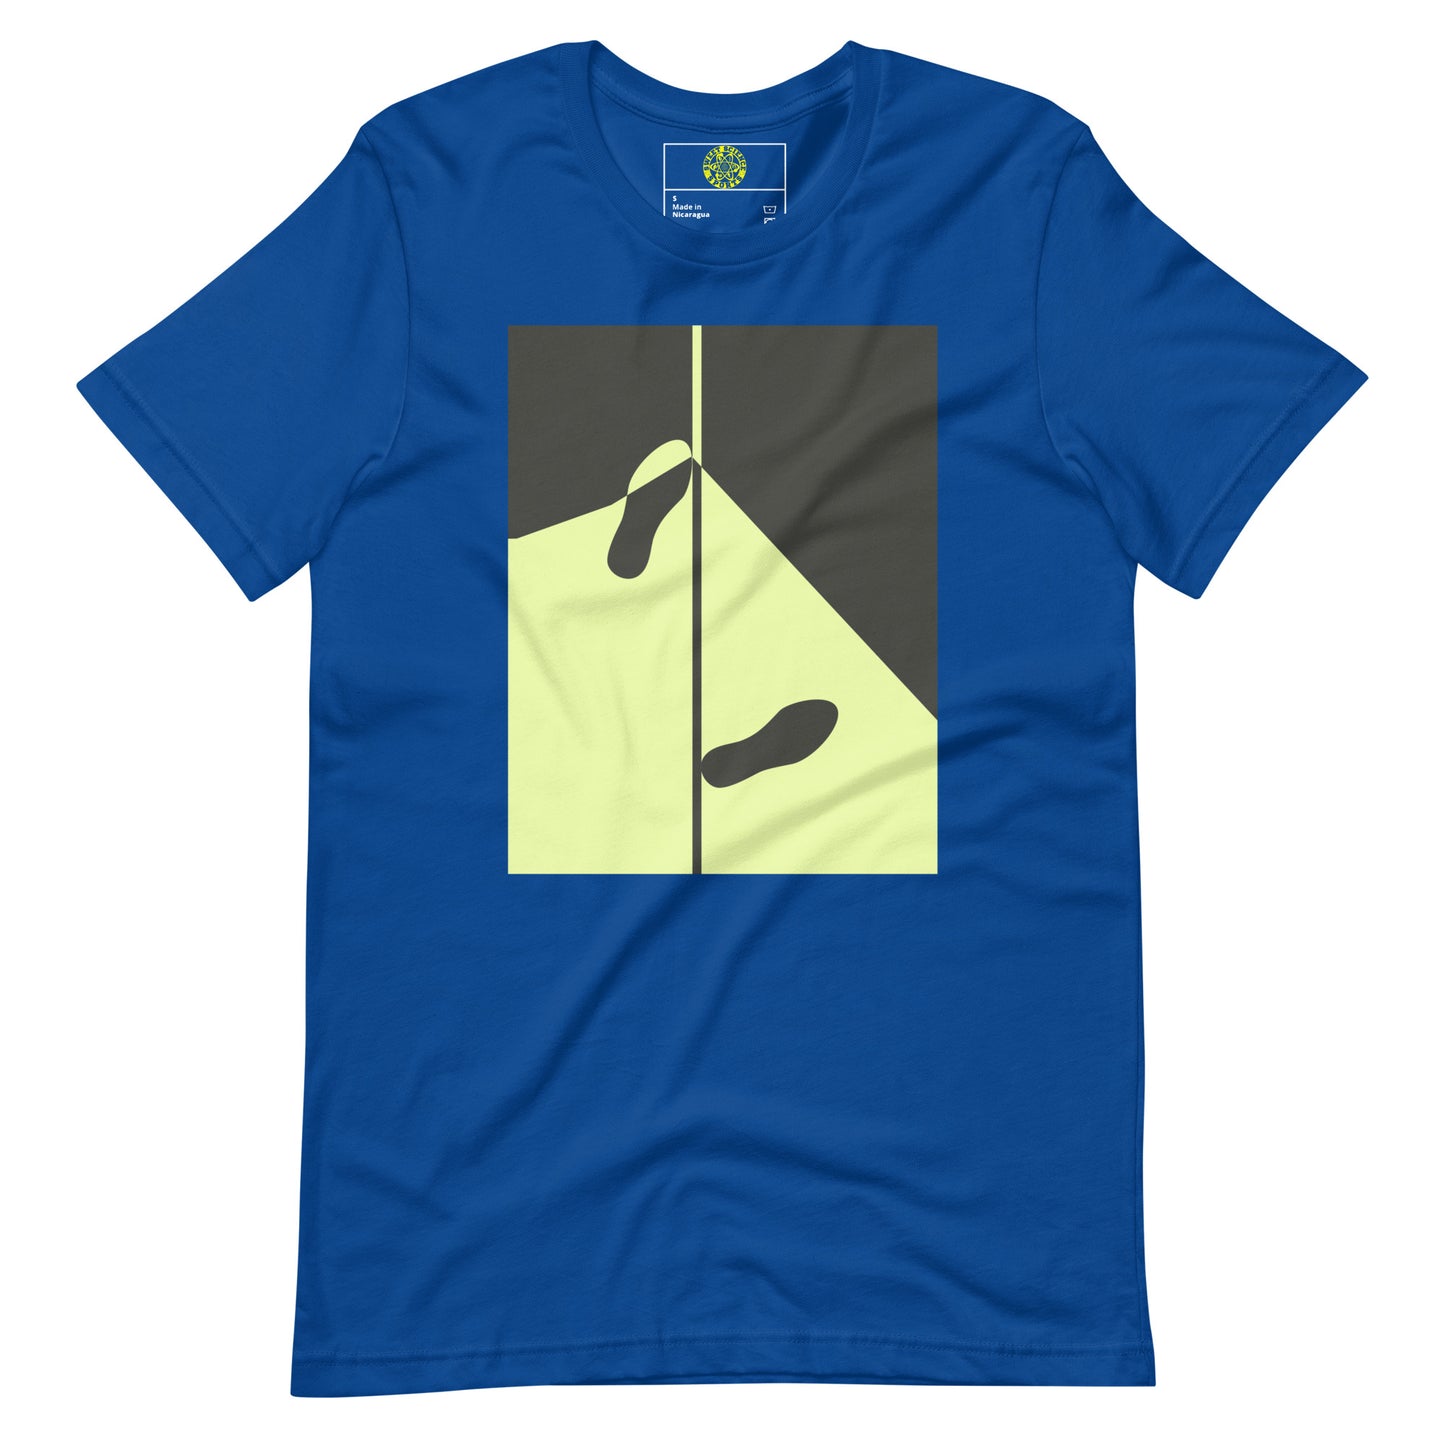 Sweet Science Sports THE FUNDAMENTALS  t-shirt